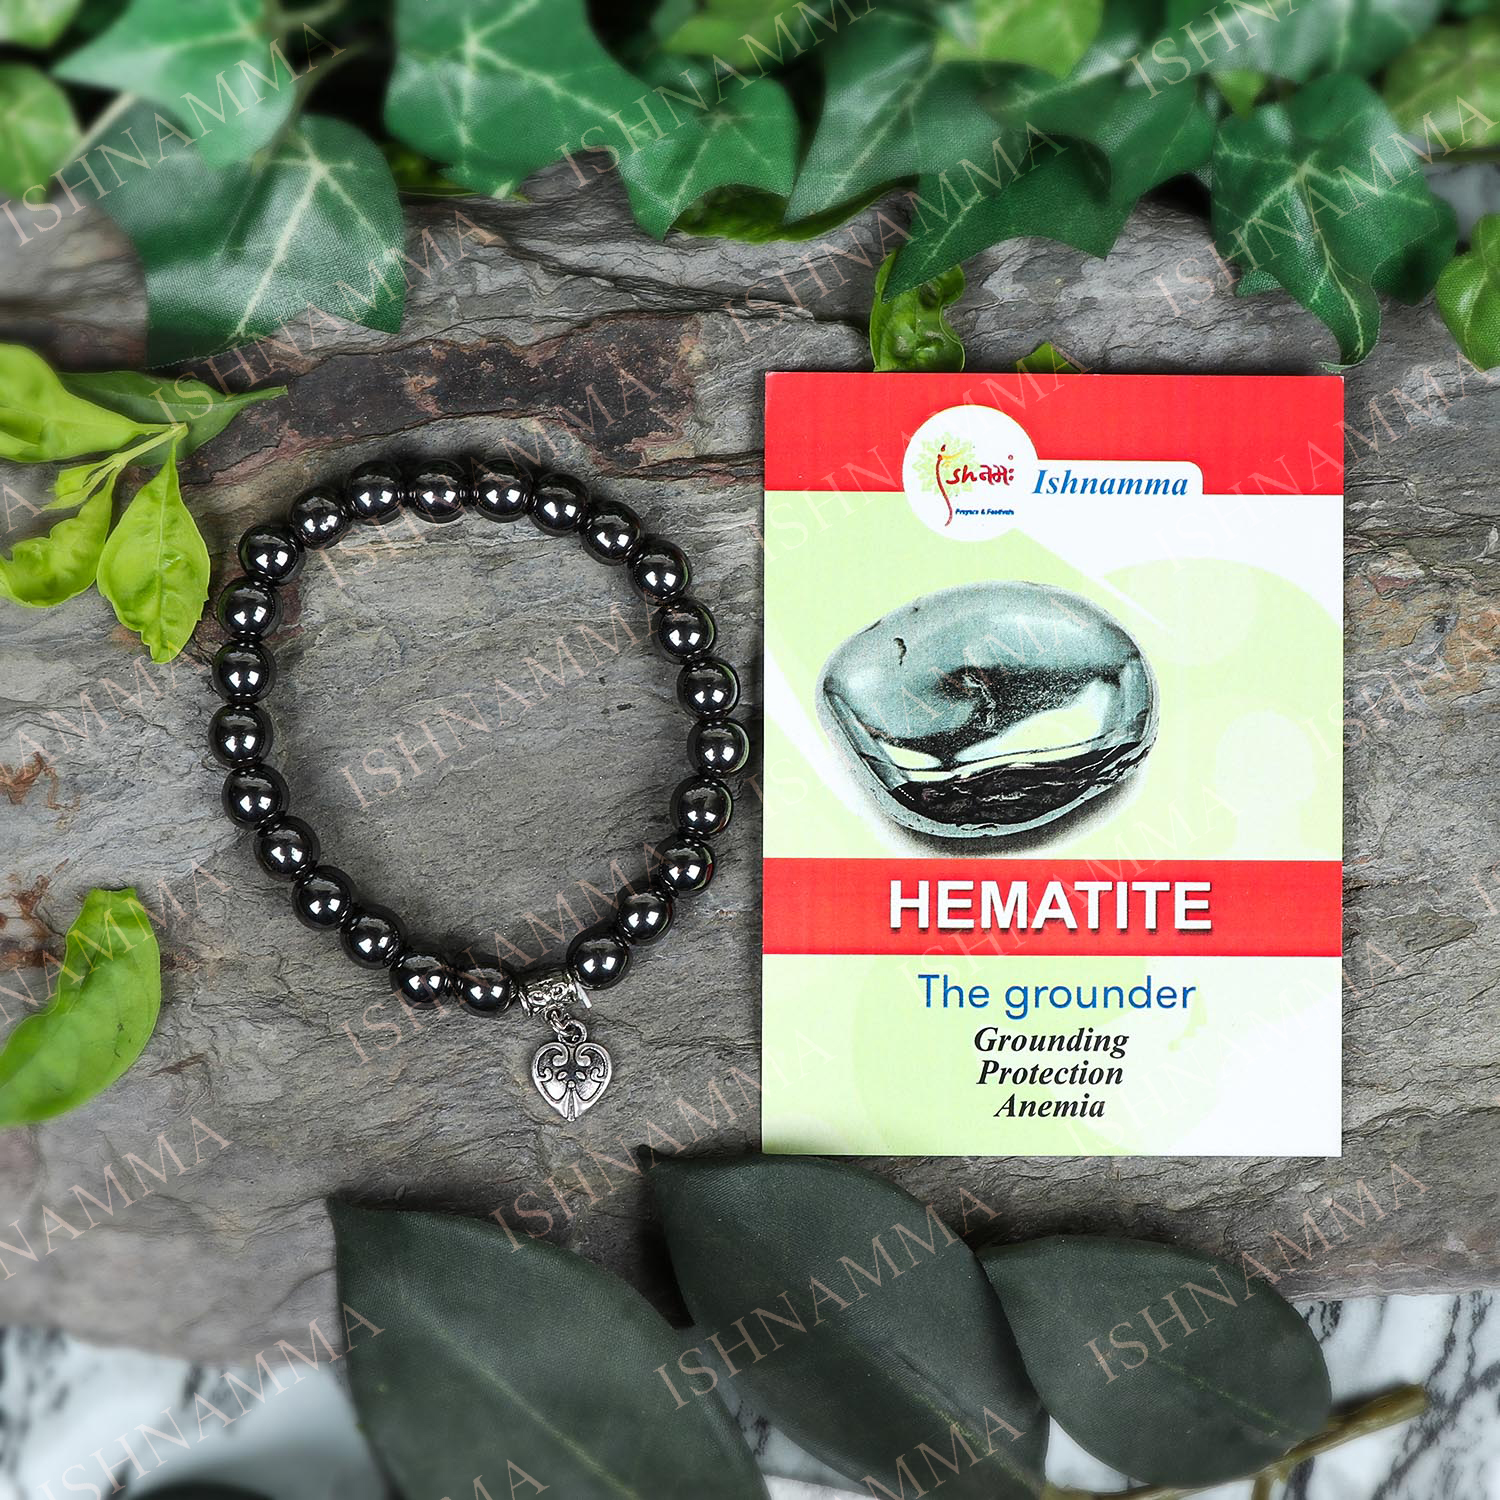 Buy Oorjas Hematite Bracelet With Lab Tested Certificate at Amazon.in